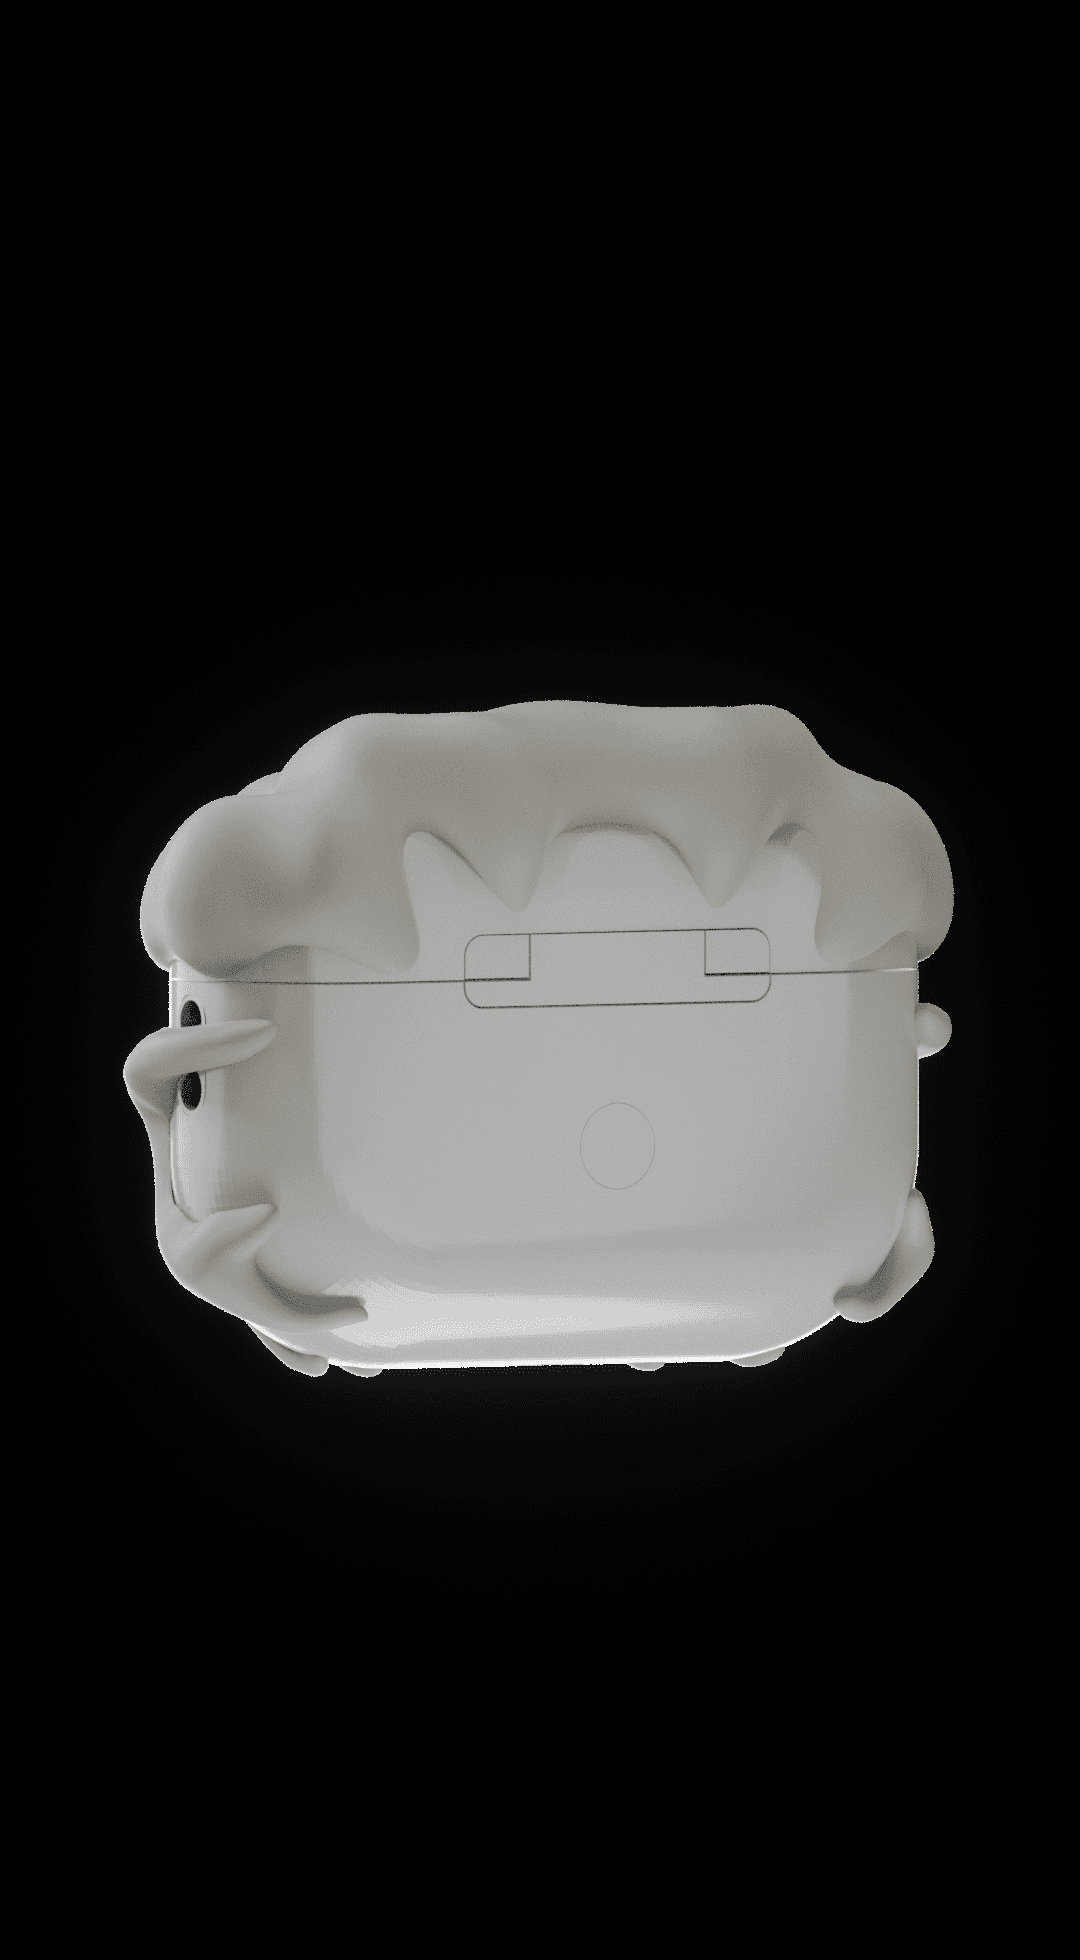 SKULL CAGE AIRPODS PRO 1/2 CASE 3d model